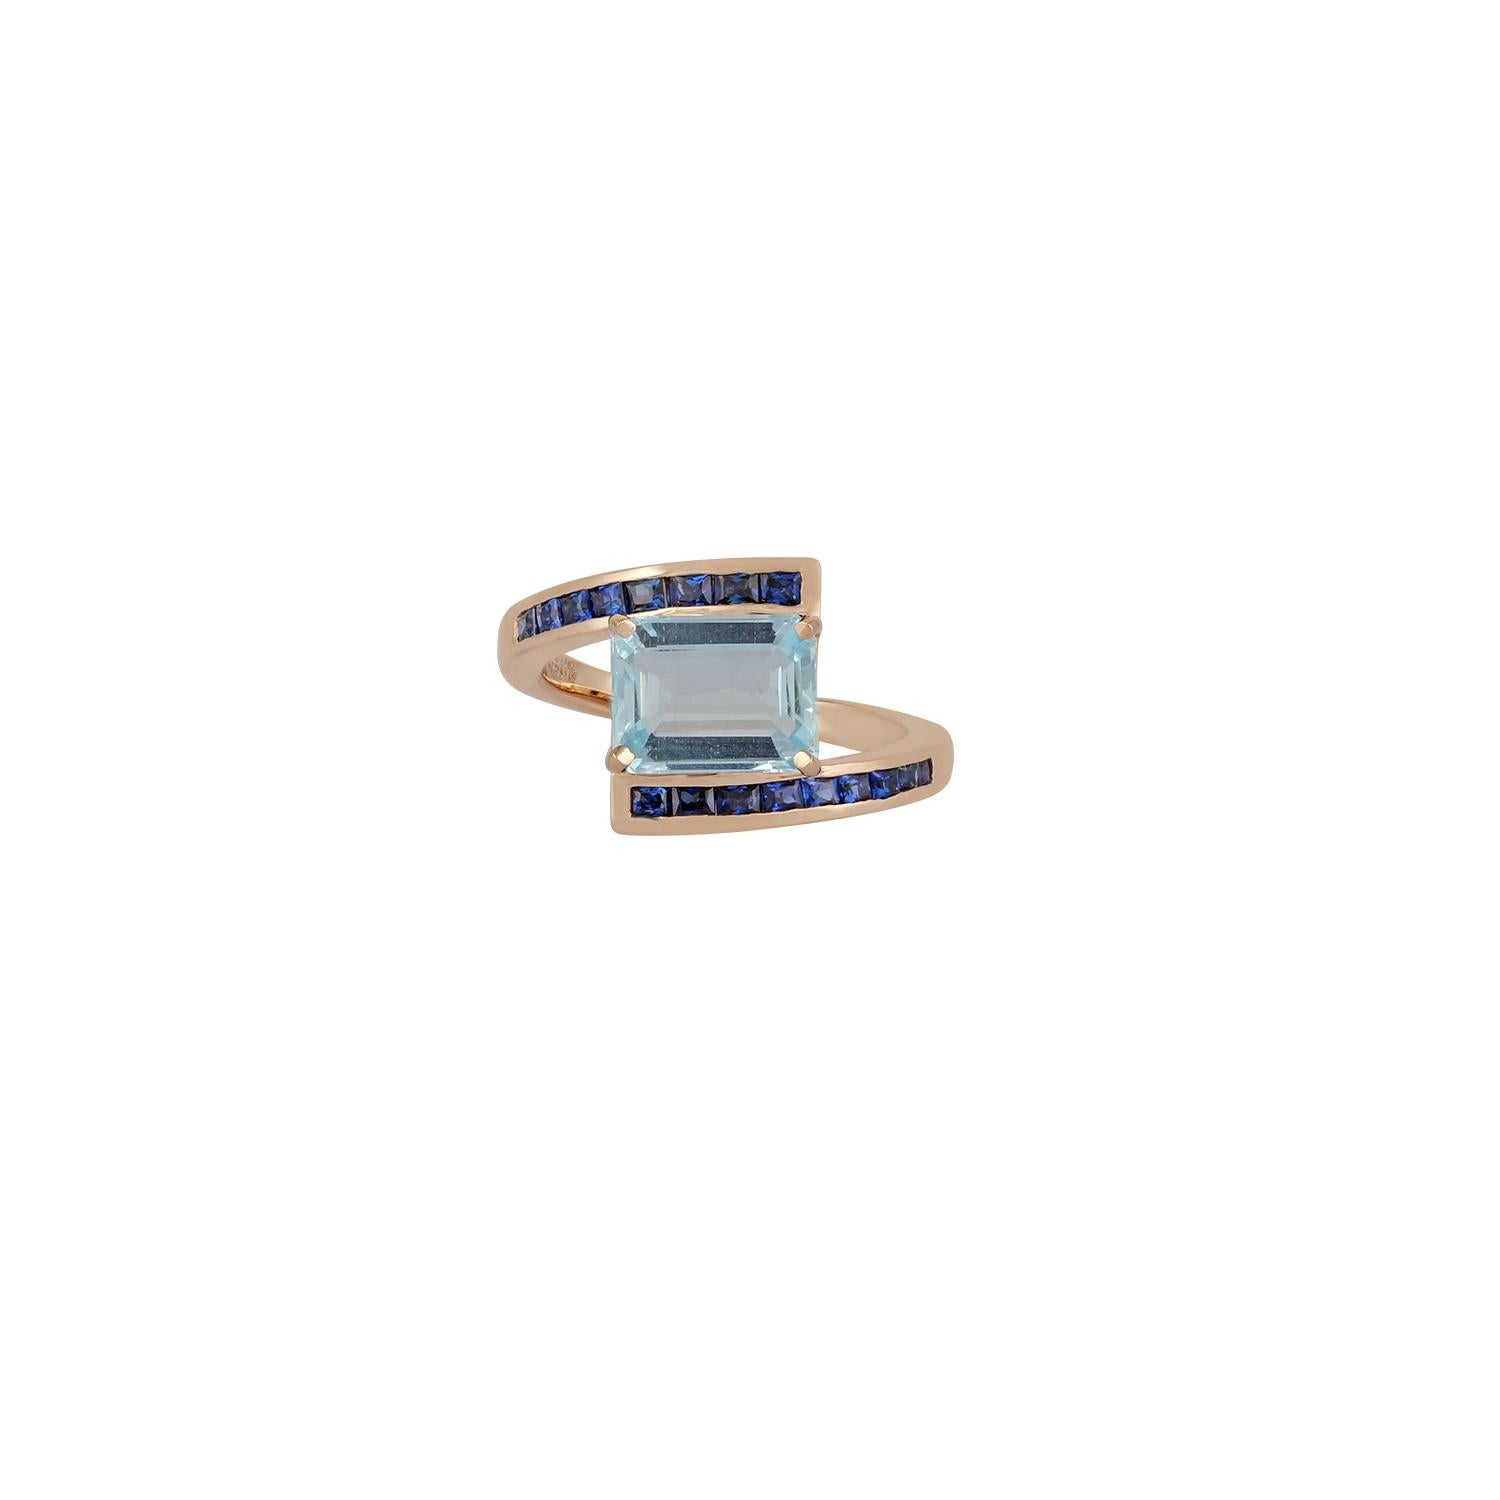 This is an exclusive aquamarine & blue sapphire ring studded in 18k yellow gold features 1 piece of octagonal shaped aquamarine weight 2.20 carat & 17 pieces of square shaped blue sapphire weight 0.65 carat, this entire ring is made of 18k yellow